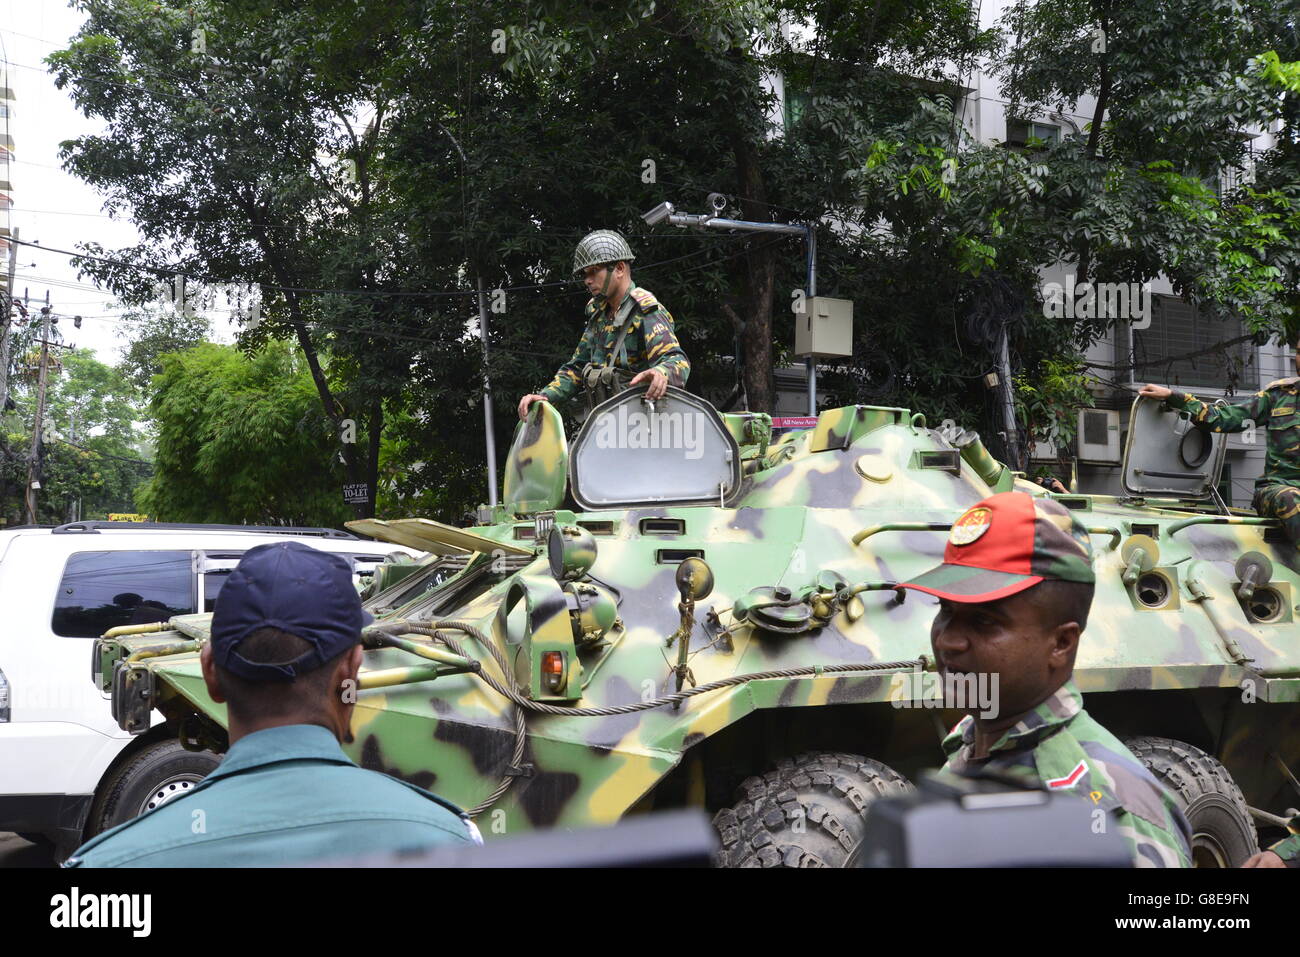 Bangladeshi armored military tank makes its way past journalists, onlookers and police near an upscale restaurant in Dhaka on July 2, 2016, following a bloody siege by armed attackers that began on July 1. Heavily armed militants murdered 20 hostages in Bangladesh, hacking many of their victims to death, before six of the attackers were gunned down at the end of a siege July 2 at a restaurant packed with foreigners. As the Islamic State (IS) group claimed responsibility for the carnage at the start of the Eid holiday, Prime Minister Sheikh Hasina said she was determined to eradicate militancy Stock Photo